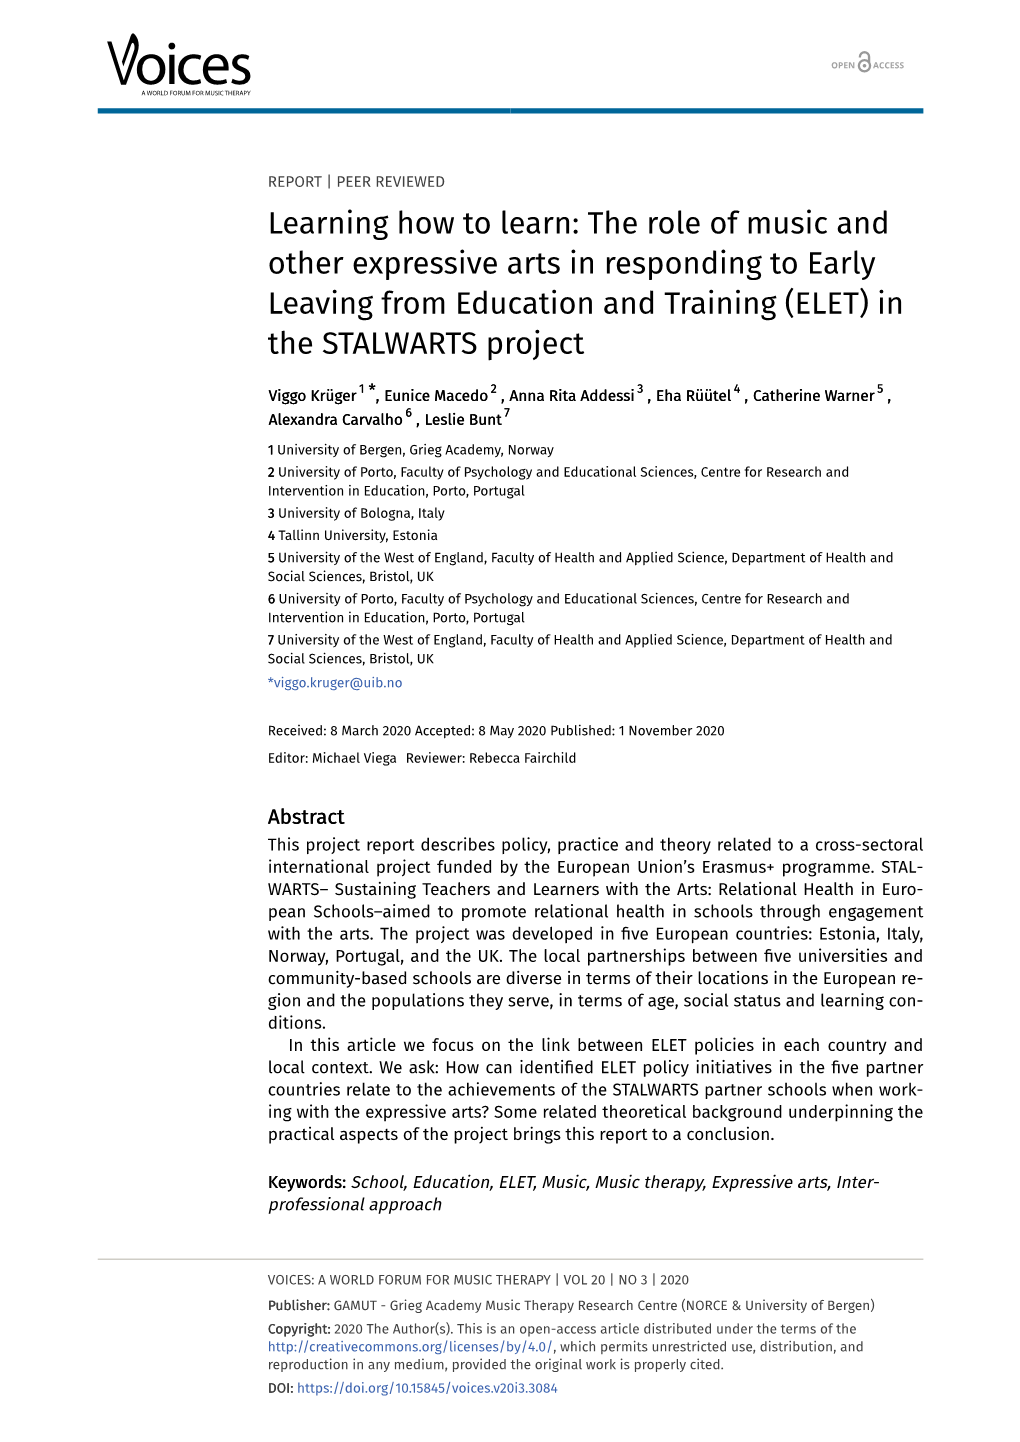 Learning How to Learn: the Role of Music and Other Expressive Arts in Responding to Early Leaving from Education and Training (ELET) in the STALWARTS Project